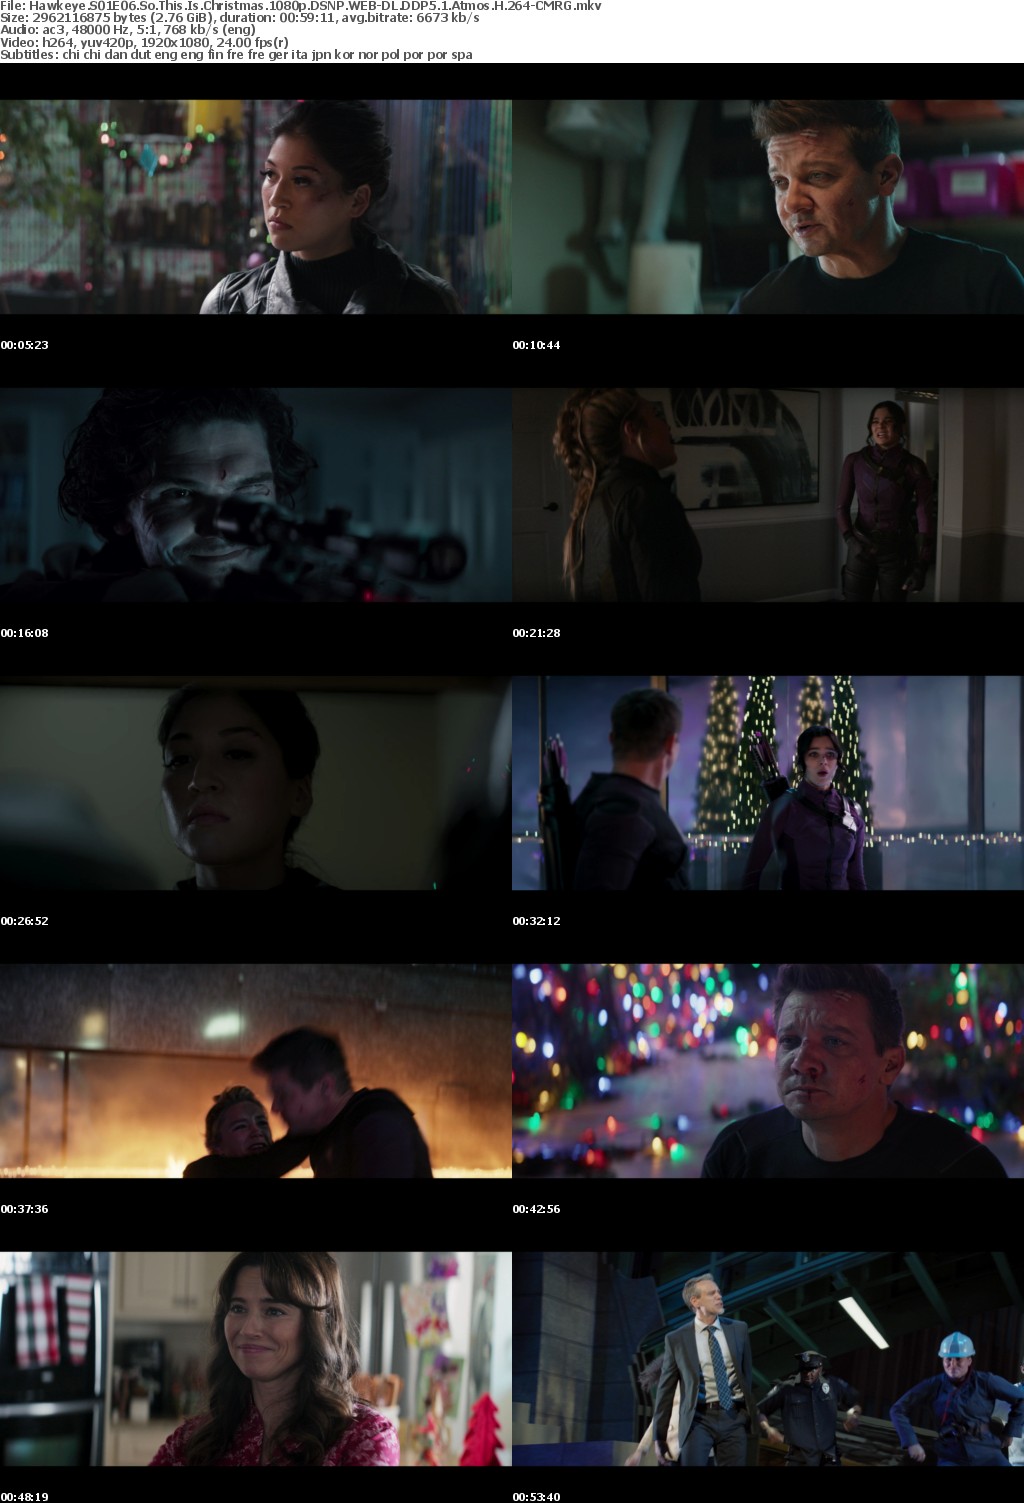 Hawkeye S01E06 So This Is Christmas 1080p DSNP WEB-DL DDP5 1 Atmos H 264-CMRG